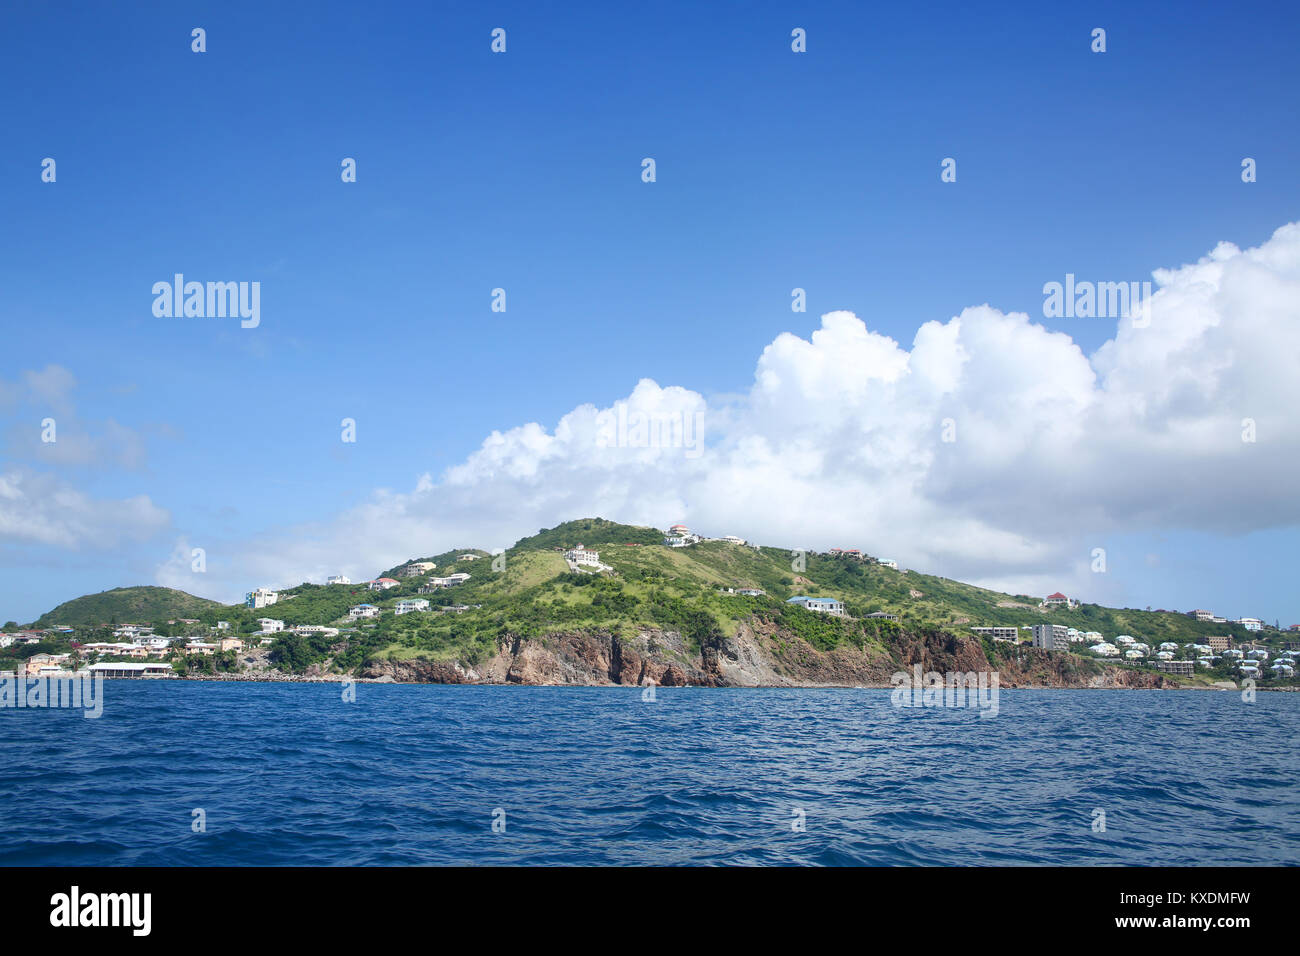 Beautiful landscape with hills on the south western coast of Saint Kitts Island, Caribbean. Stock Photo